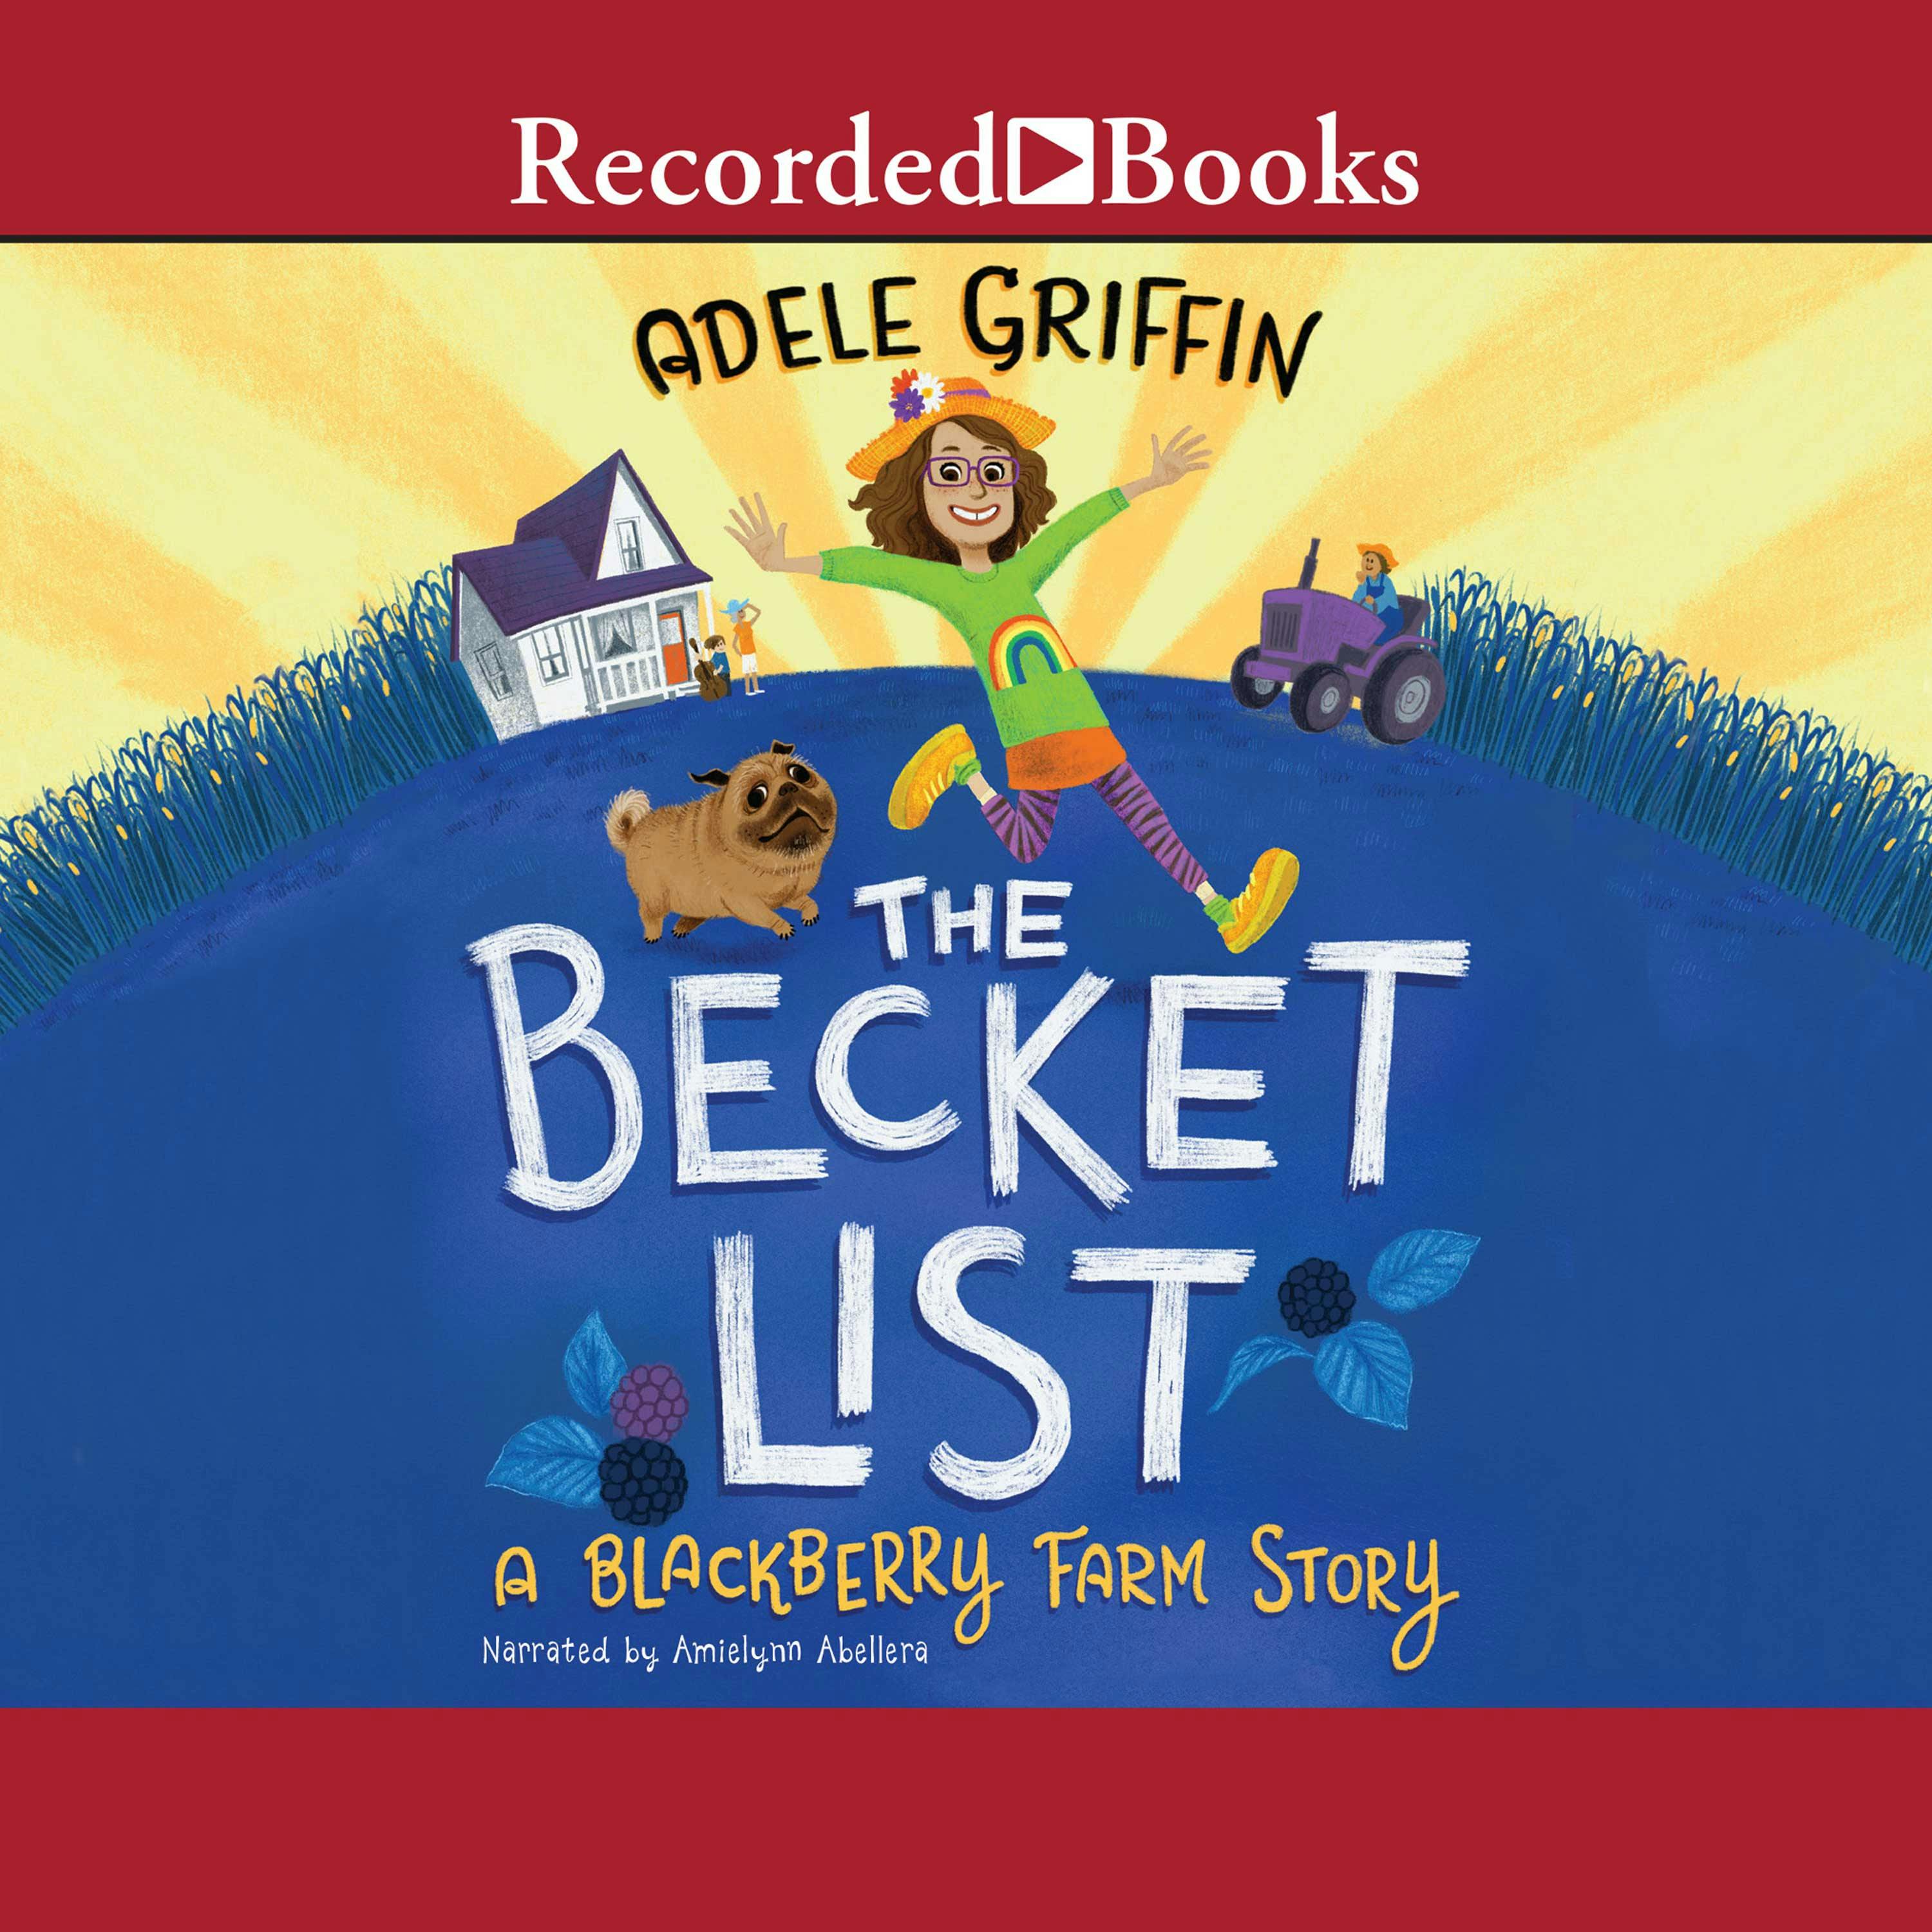 The Becket List: A Blackberry Farm Story - Adele Griffin